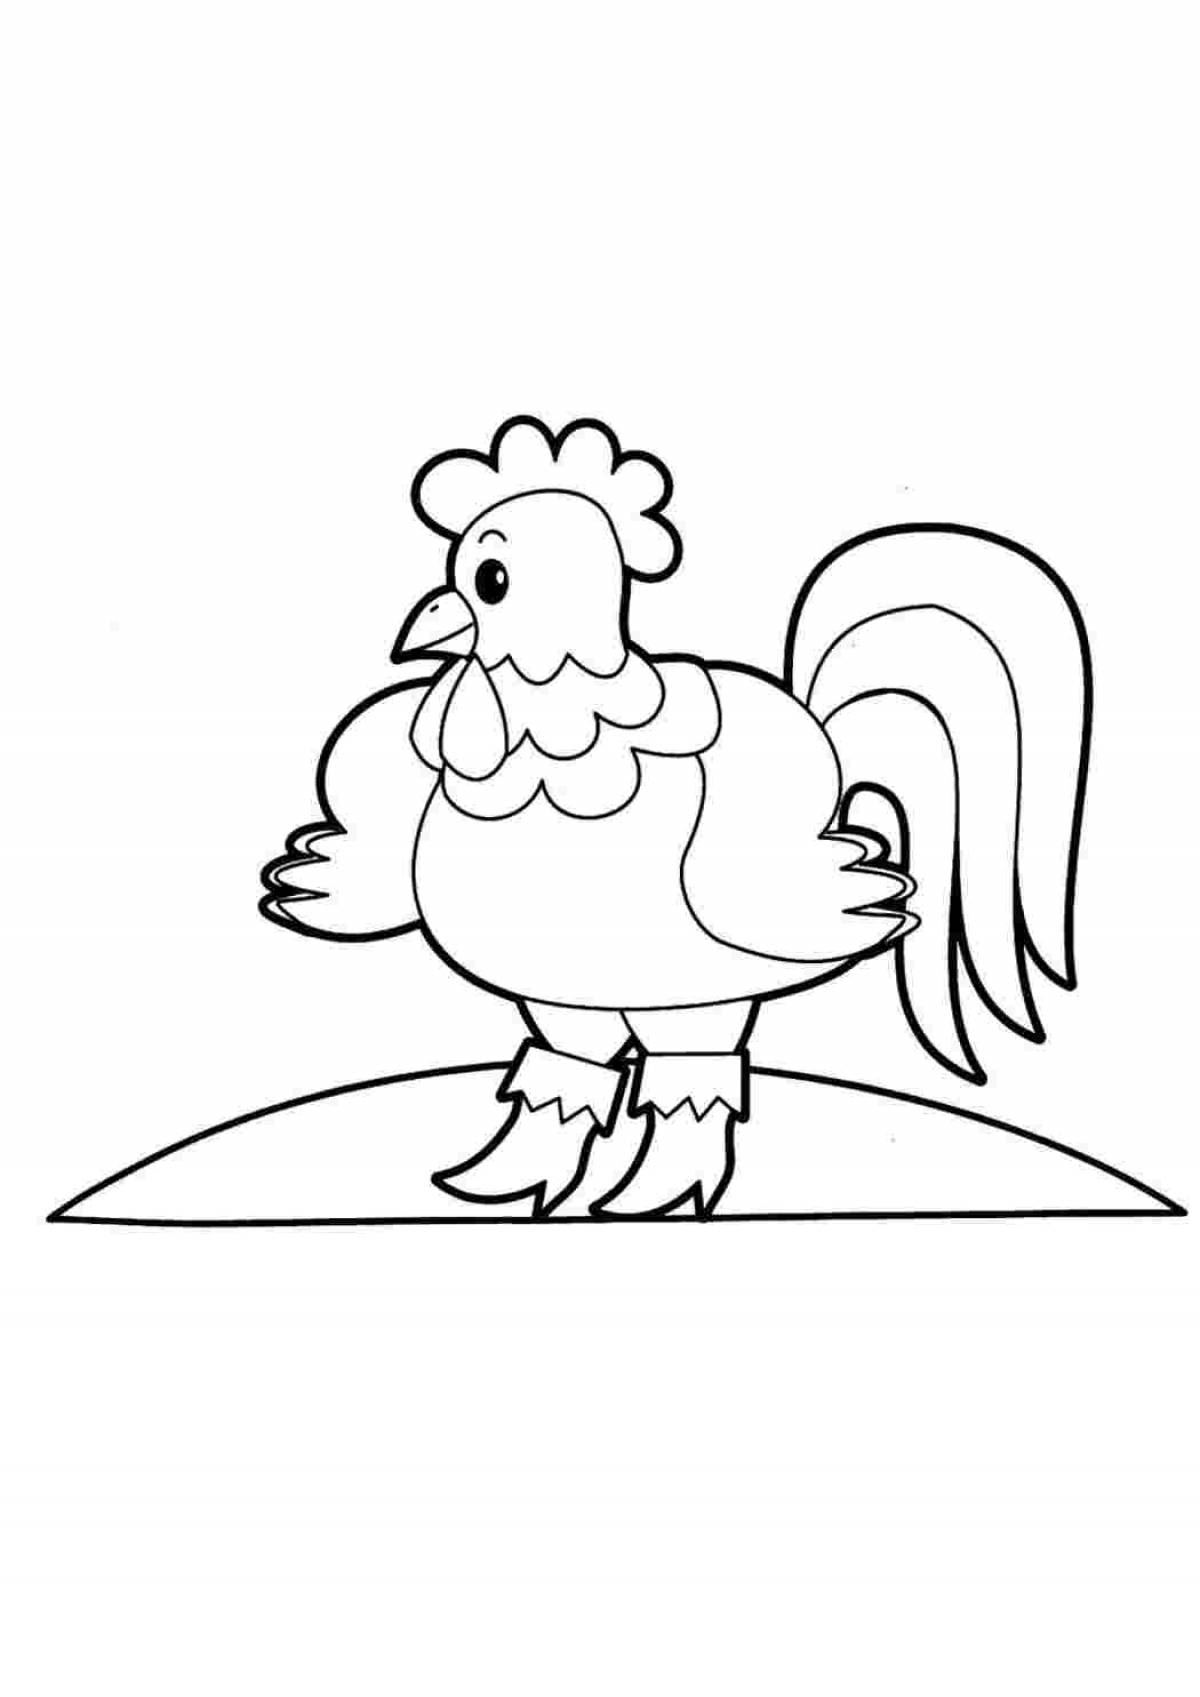 Courageous rooster coloring page for children 4-5 years old